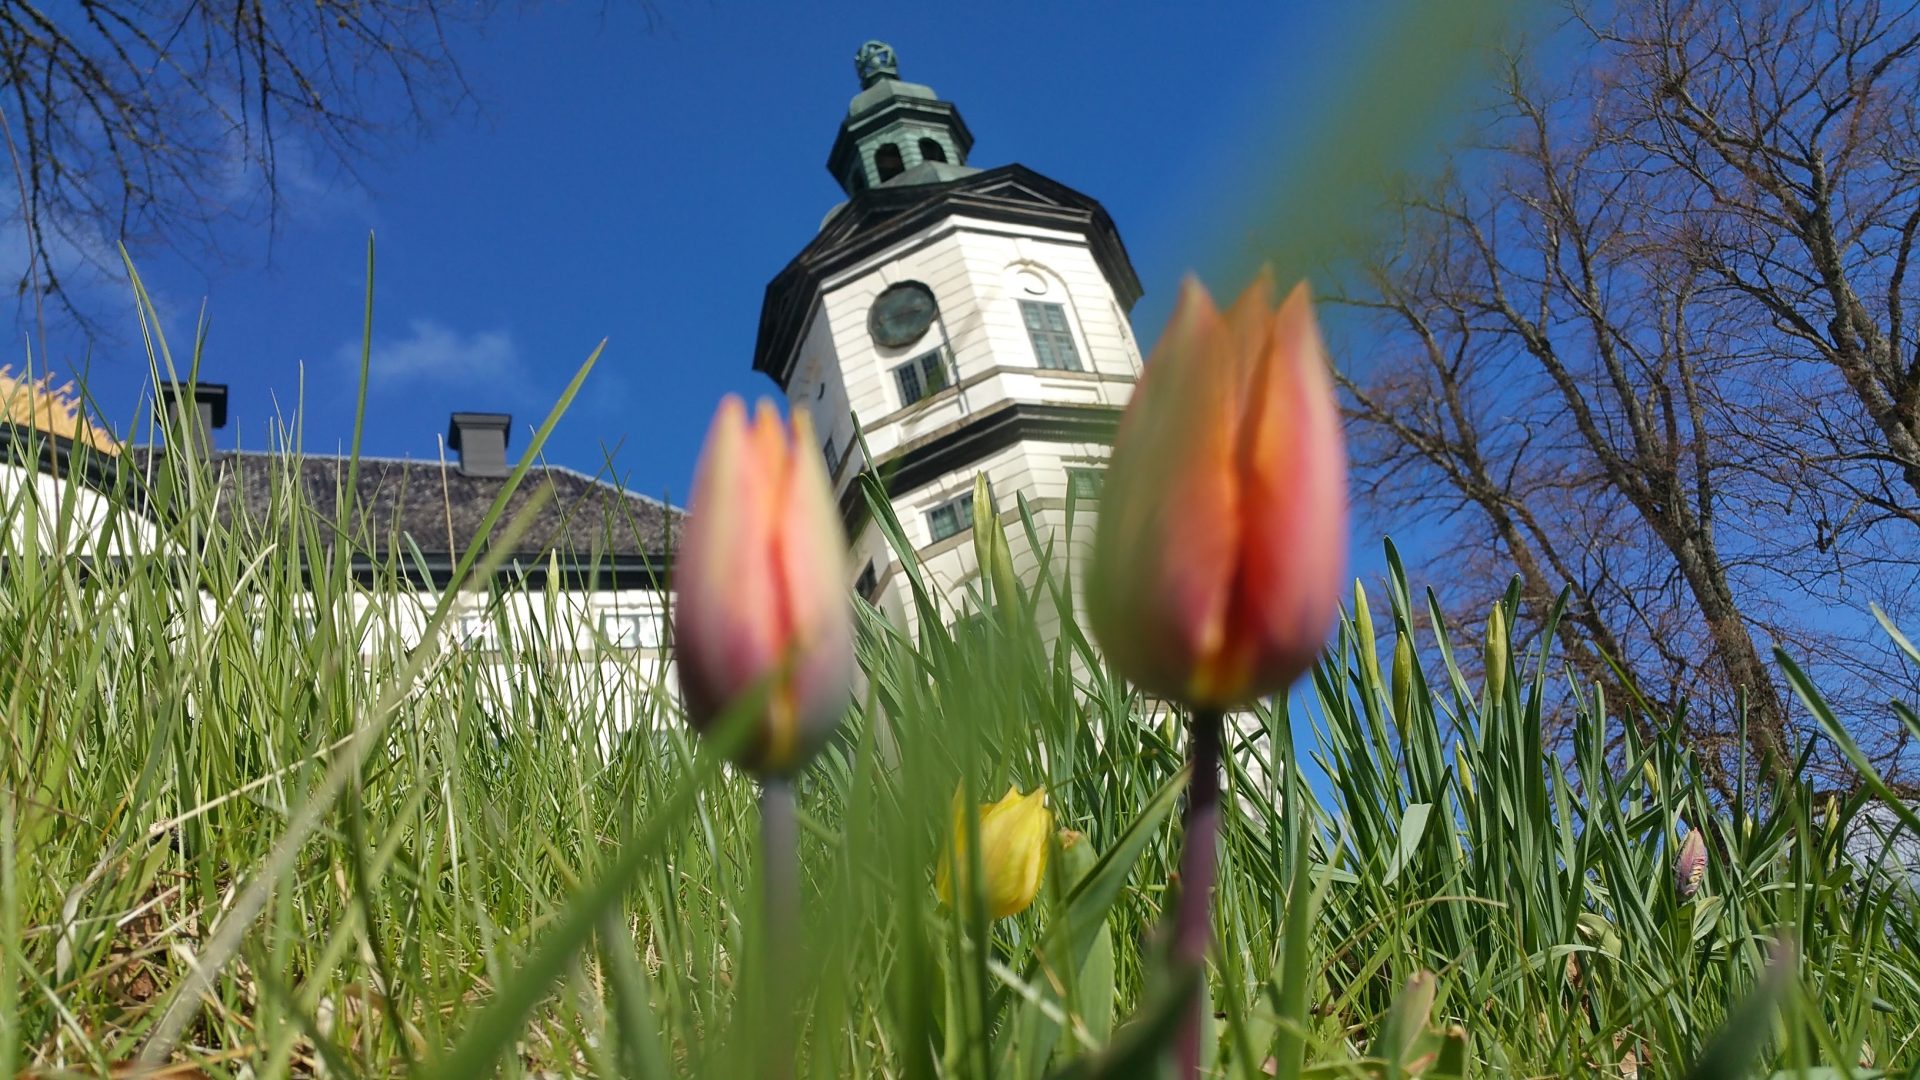 Tulips in the foreground and Skokloster Castle in the background.